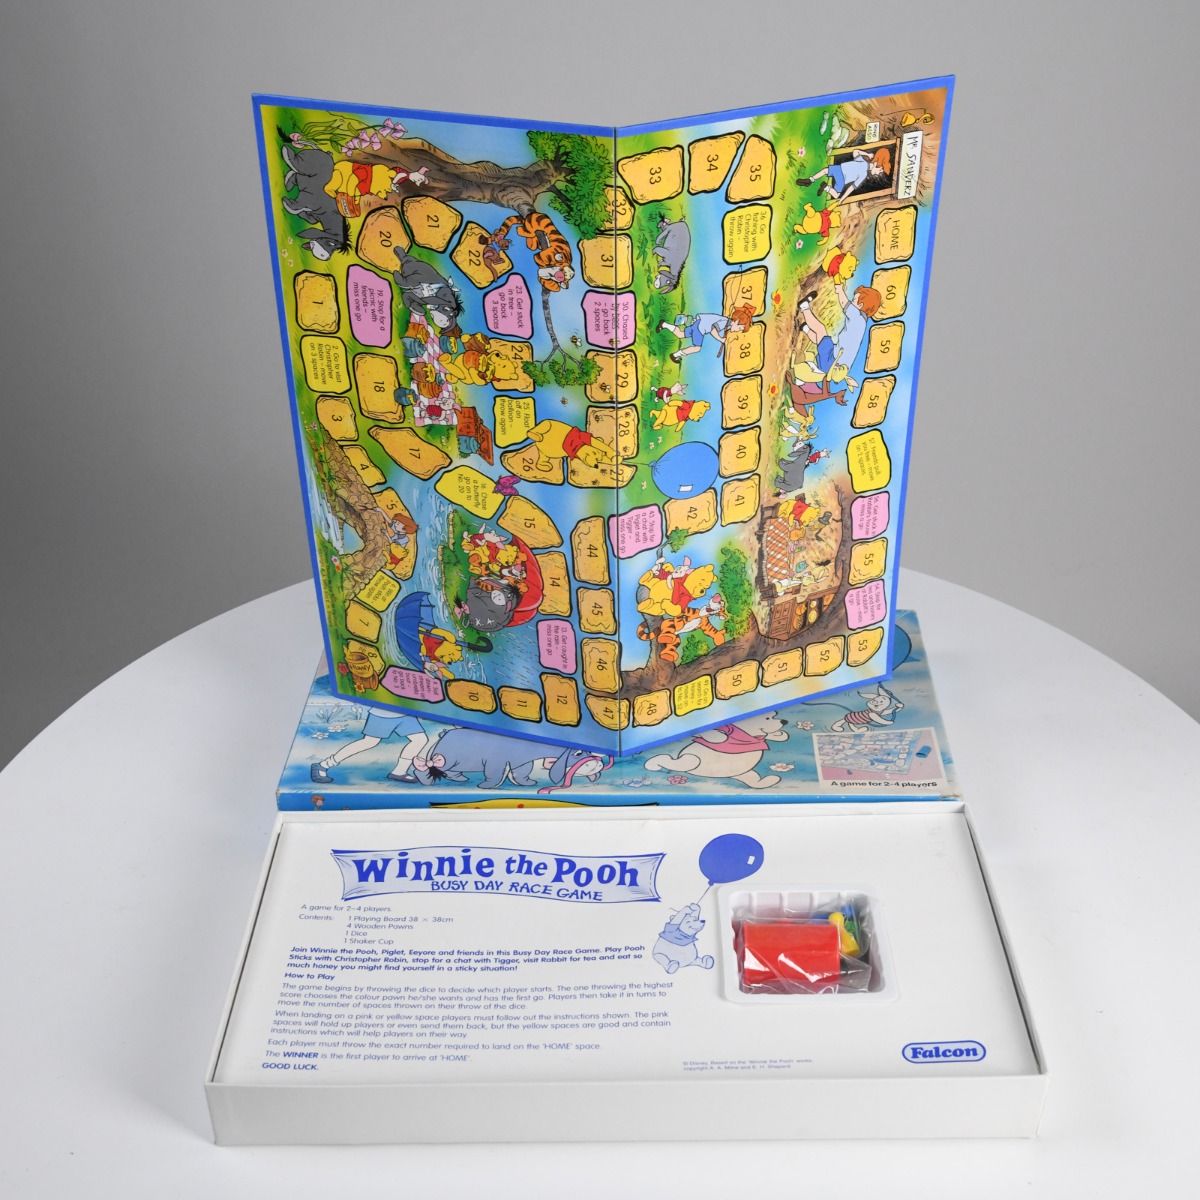 'Winnie The Pooh - Busy Day Race Game' 1984 Board Game